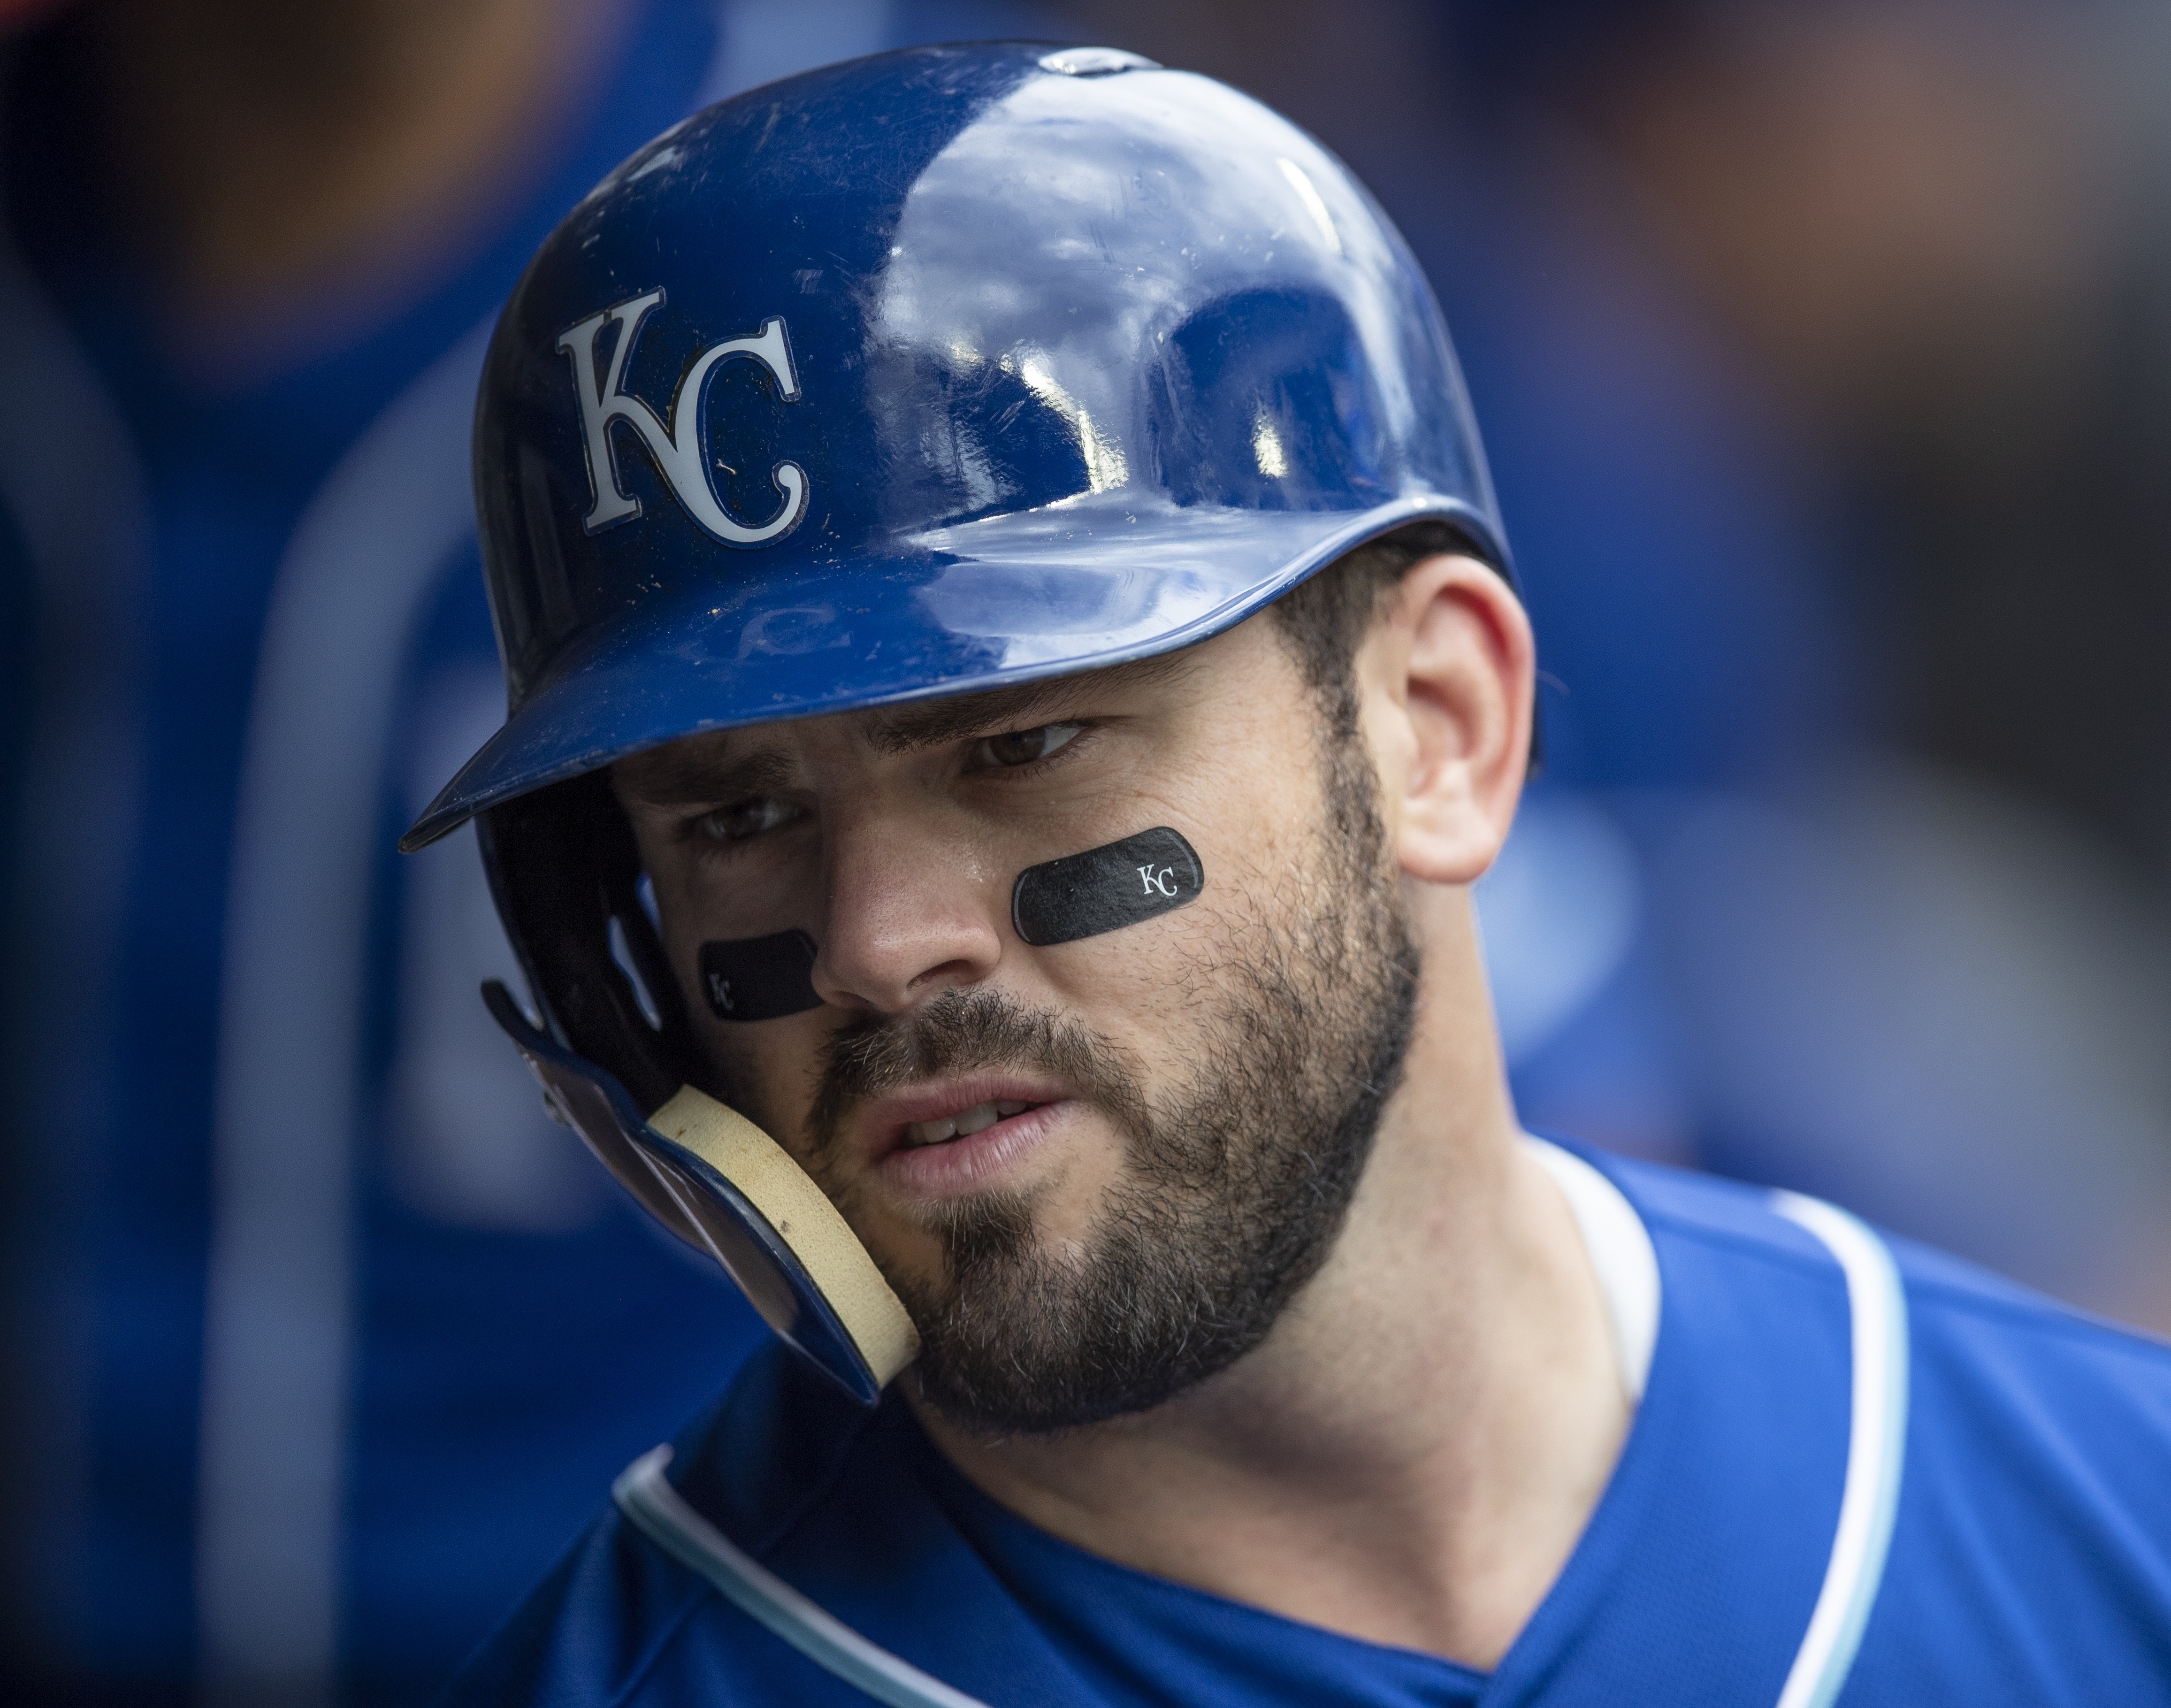 Mike Moustakas #8 of the Kansas City Royals is pictured in the dugout before a game against the Seattle Mariners at Safeco Field on July 1, 2018 in Seattle, Washington. The Mariners won the game 1-0.